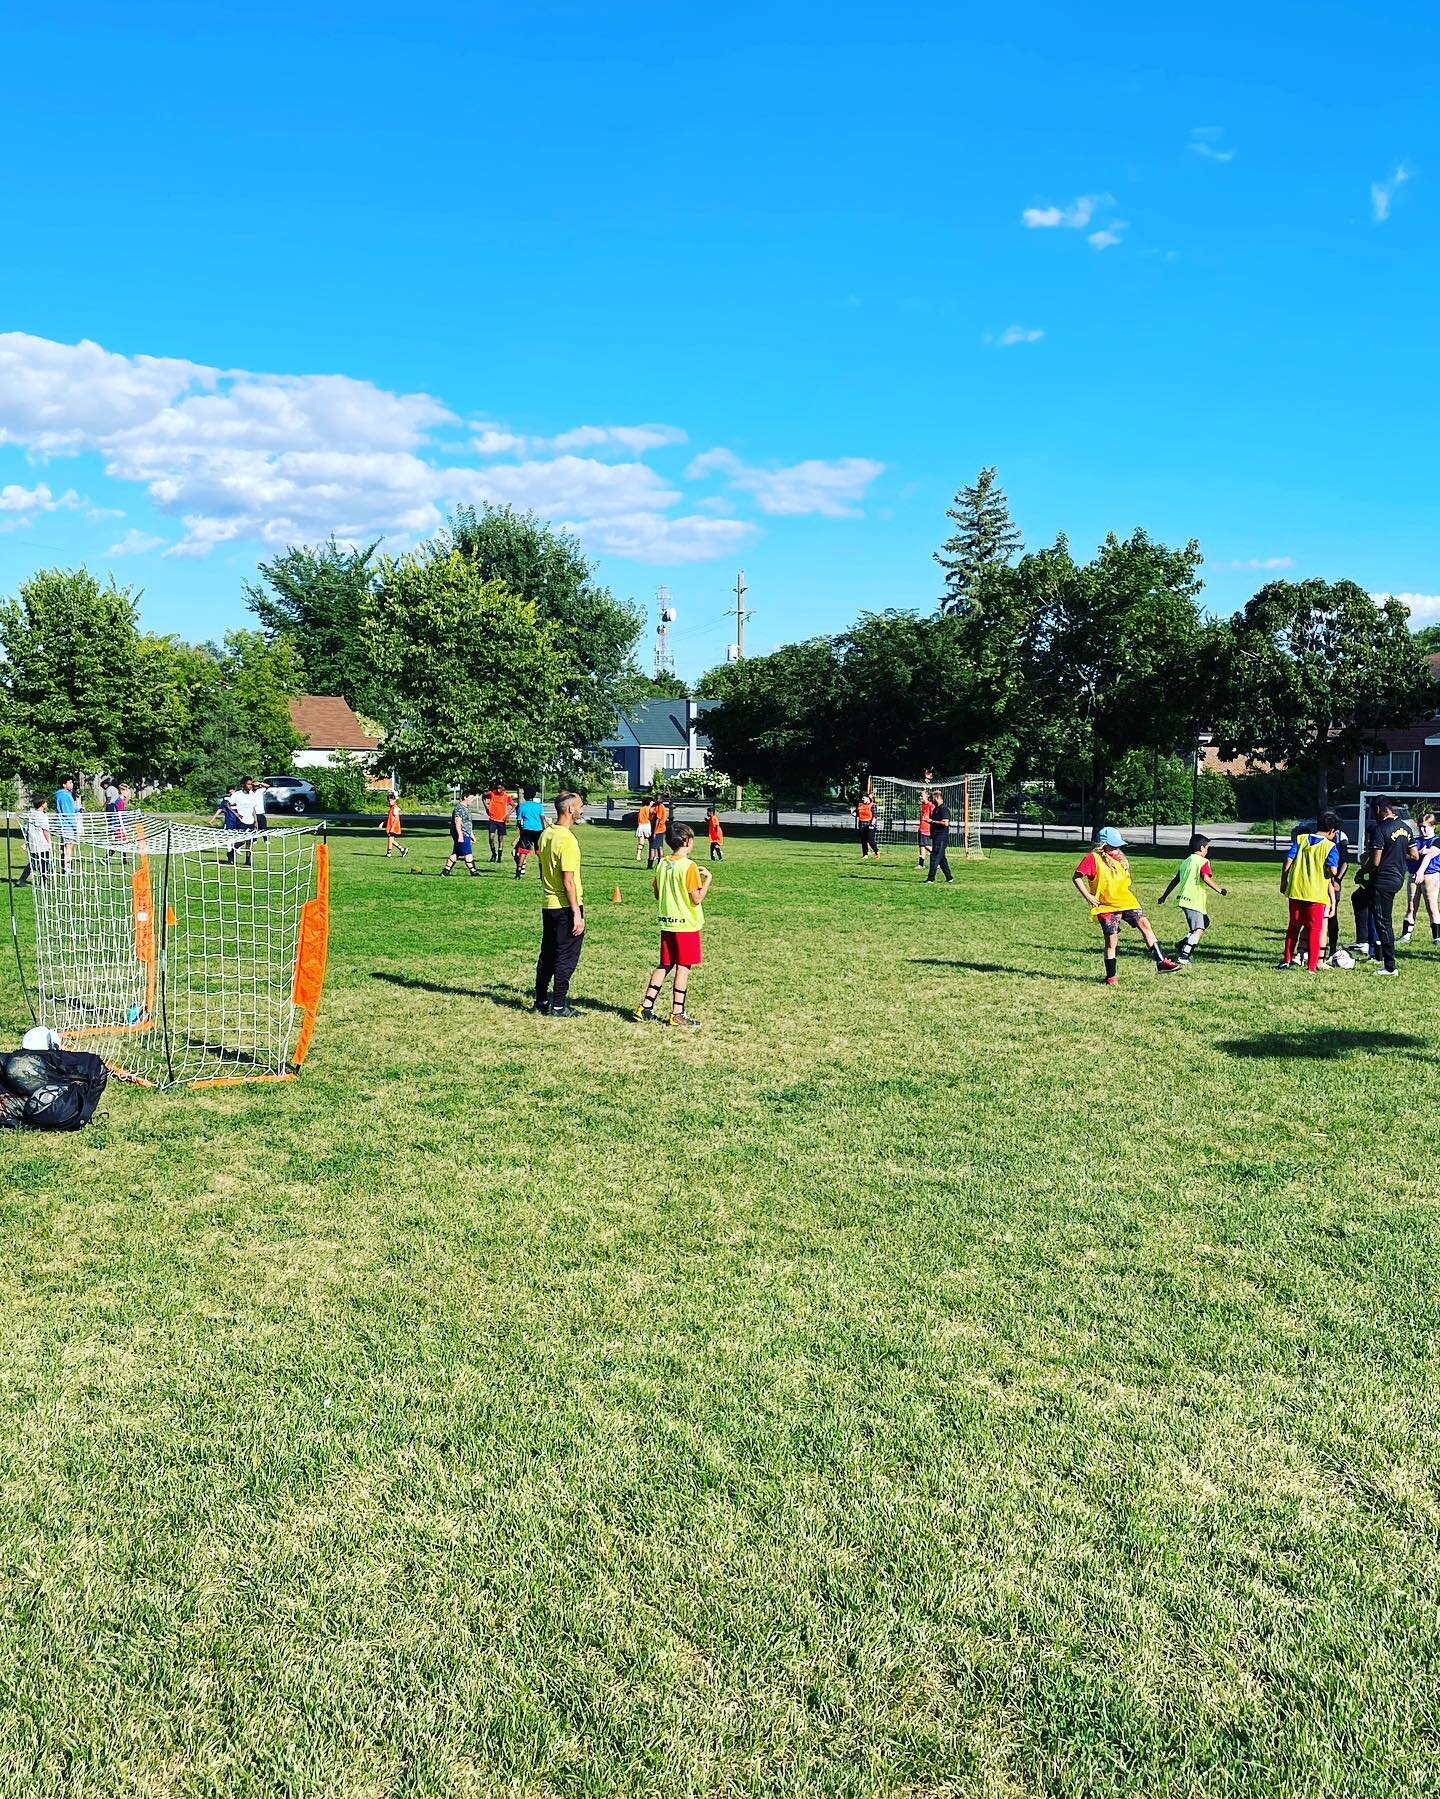 So many happy (and sweaty) faces today!! Our YES project Soccer and Art event was a success with more than 30 players who enjoyed drills and games with coaches from @mundialfcacademy and free ice cream from @julianosgelato! Thanks very one for coming